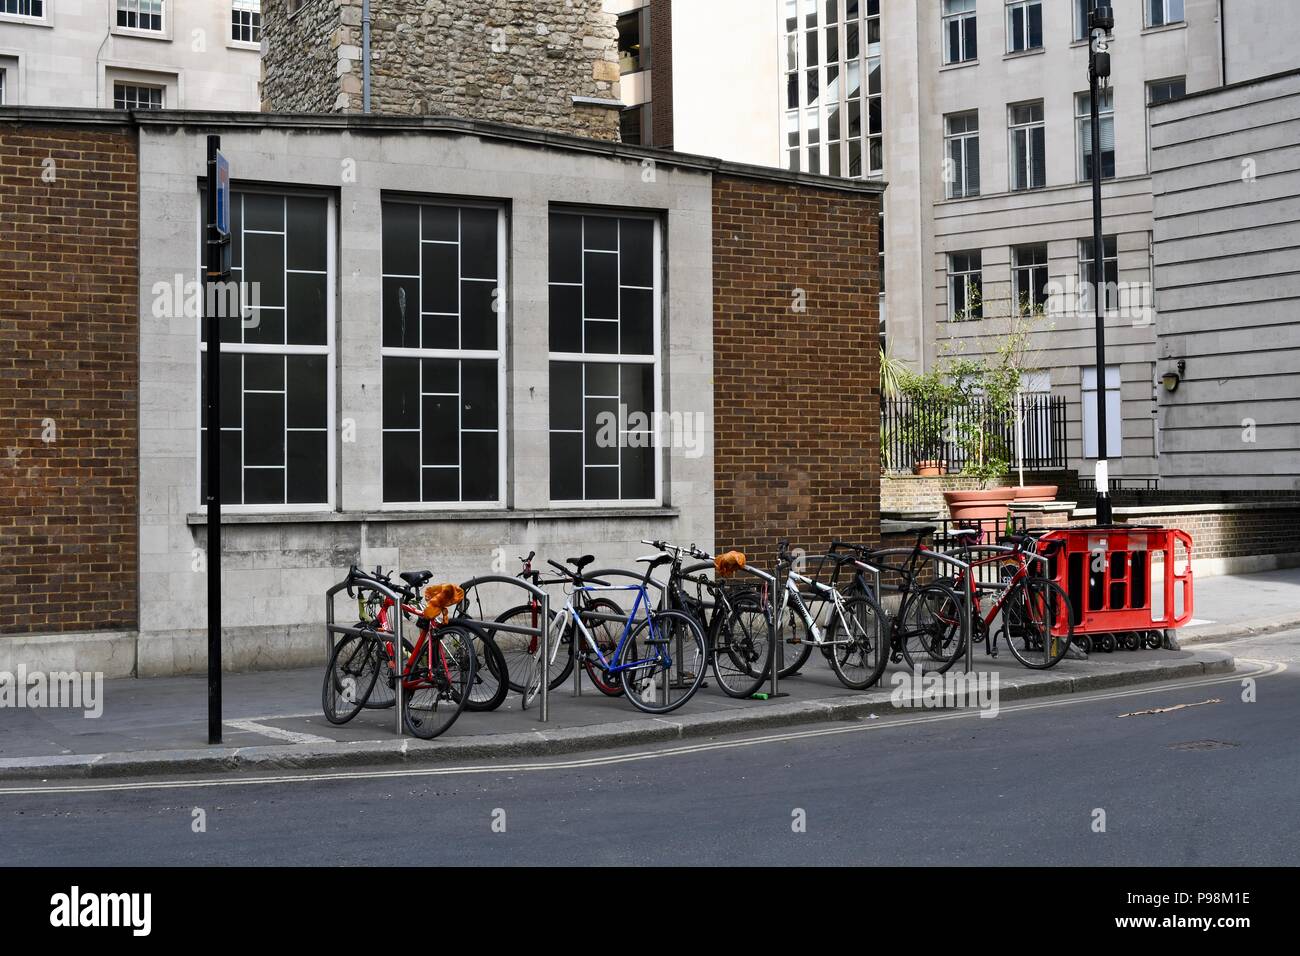 Bicycle parking across from London Fenchurch Street station Stock Photo